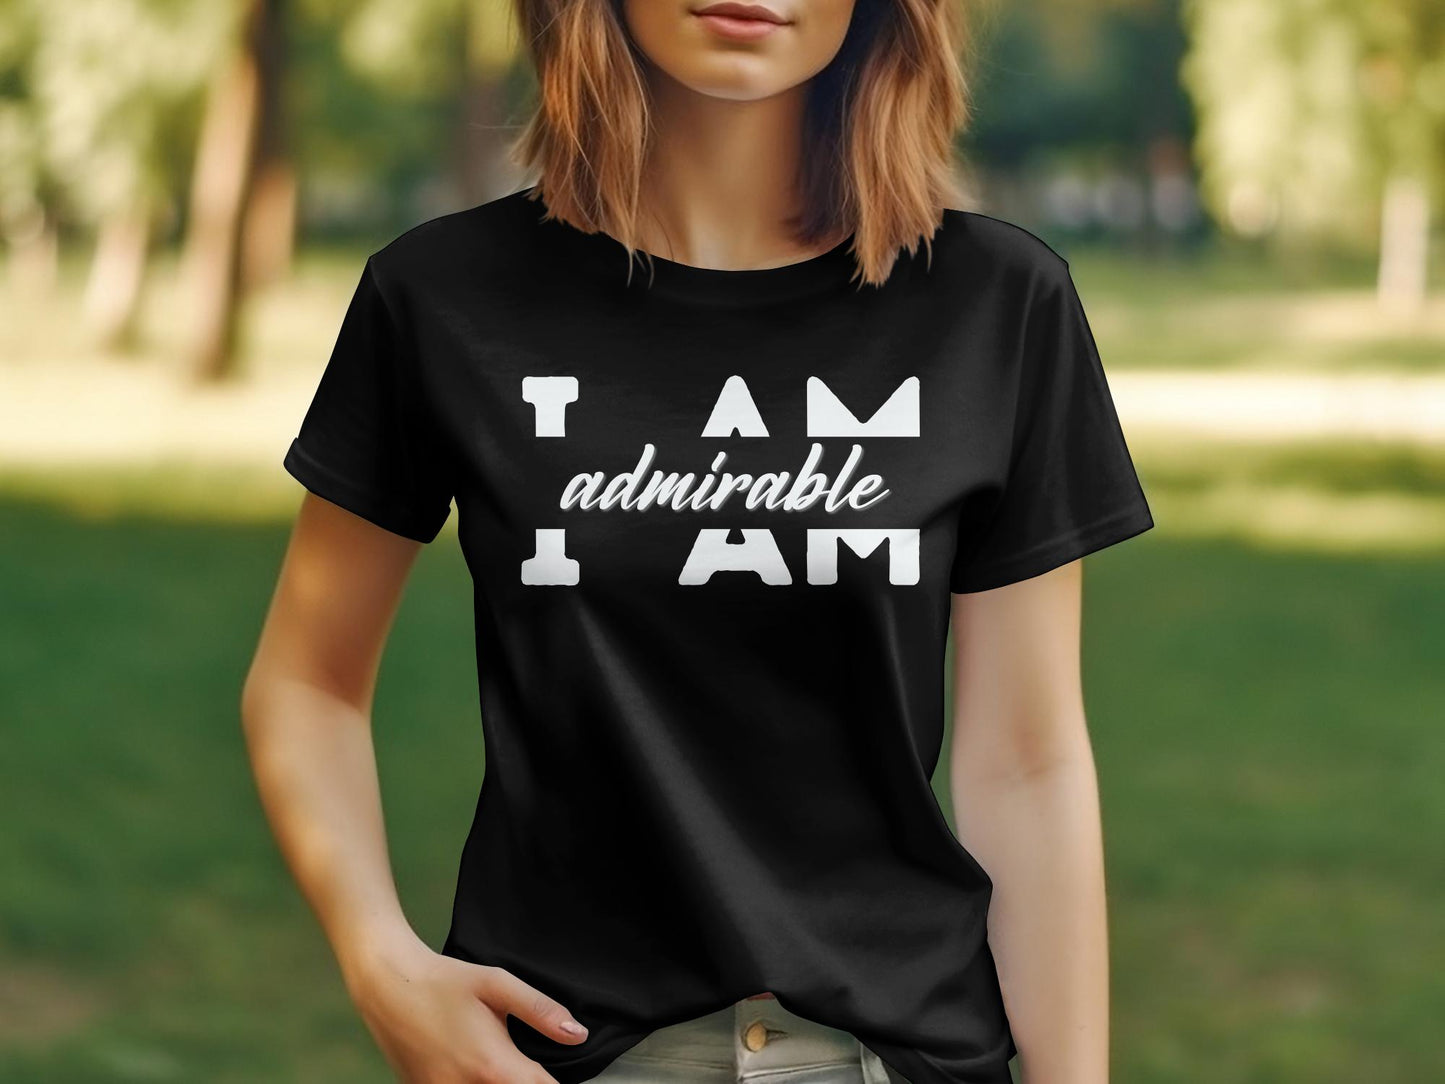 I Am Admirable - An encouraging and motivating Affirmation Quote T-shirt.